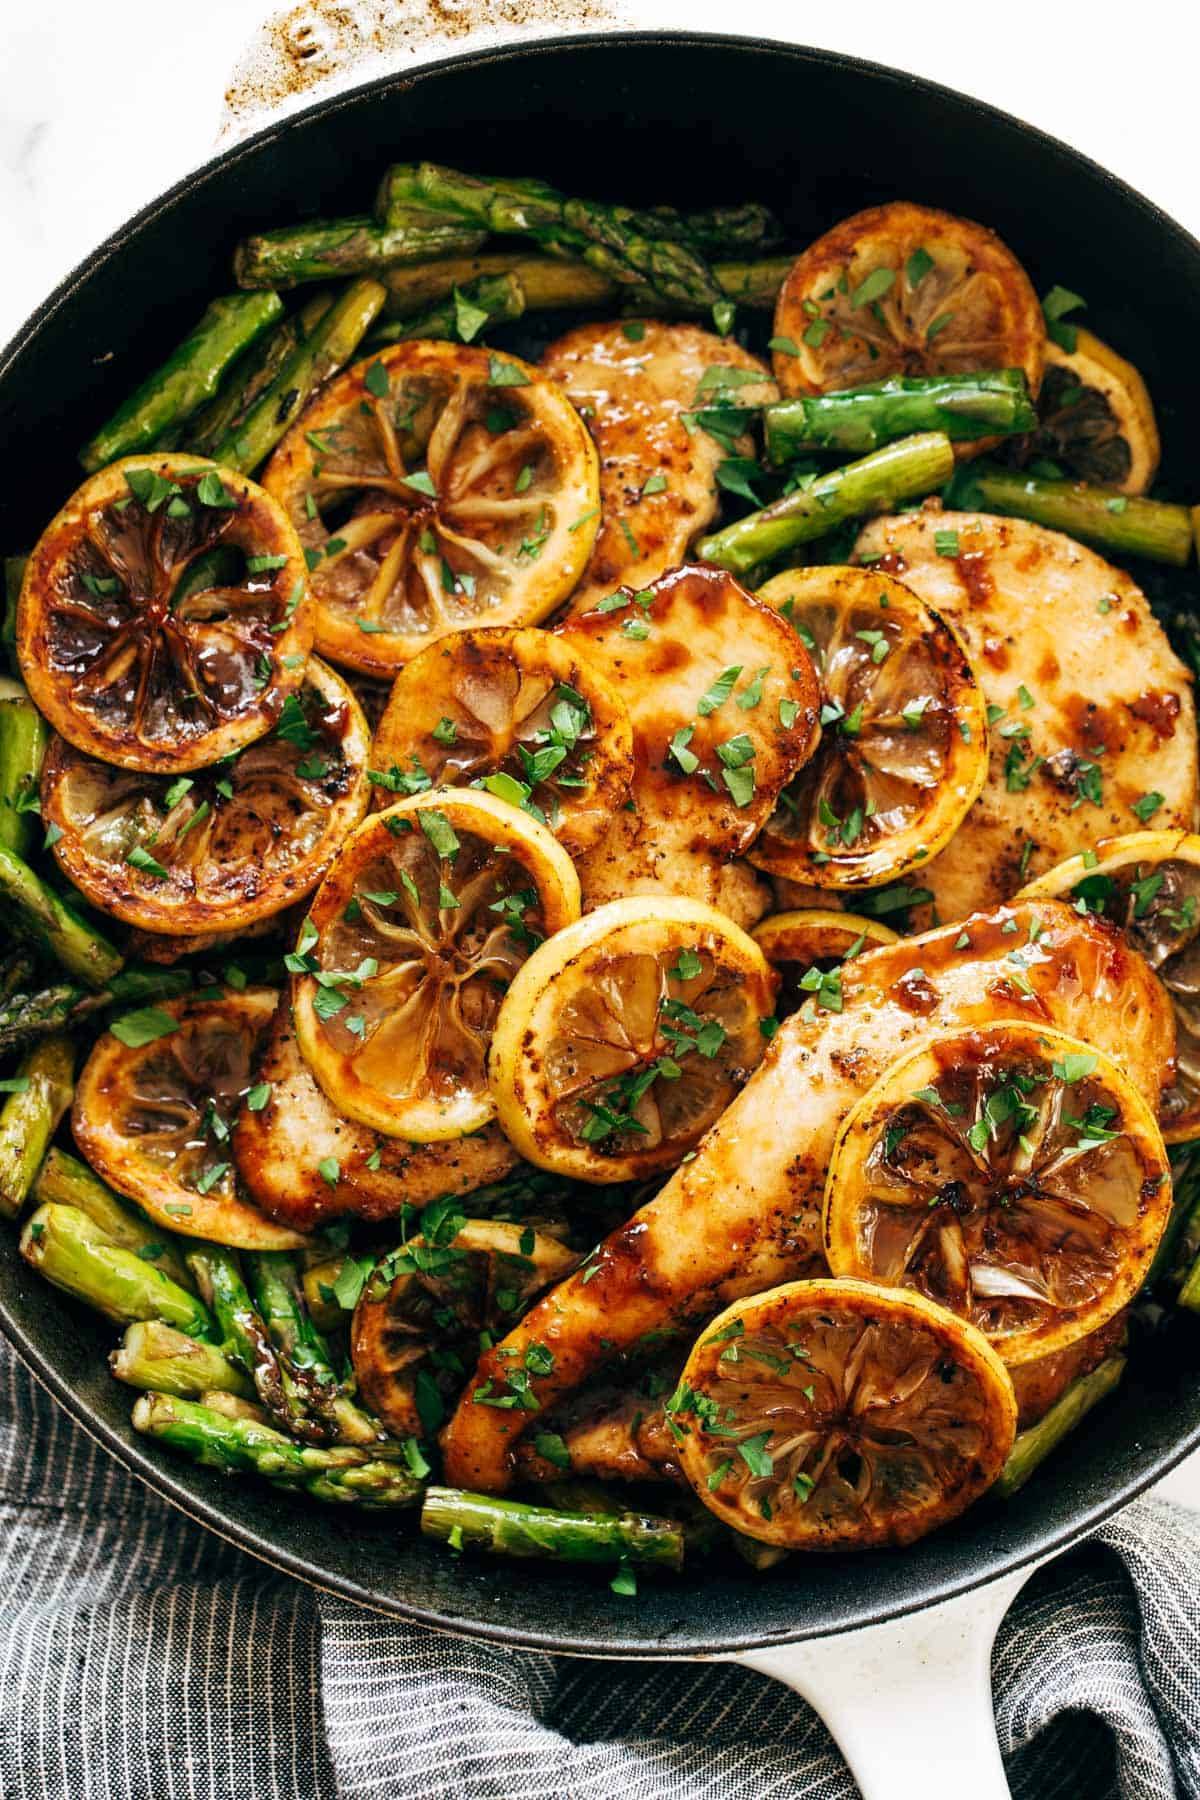 Lemon Chicken with Asparagus cooked in a cast iron skillet ready to serve